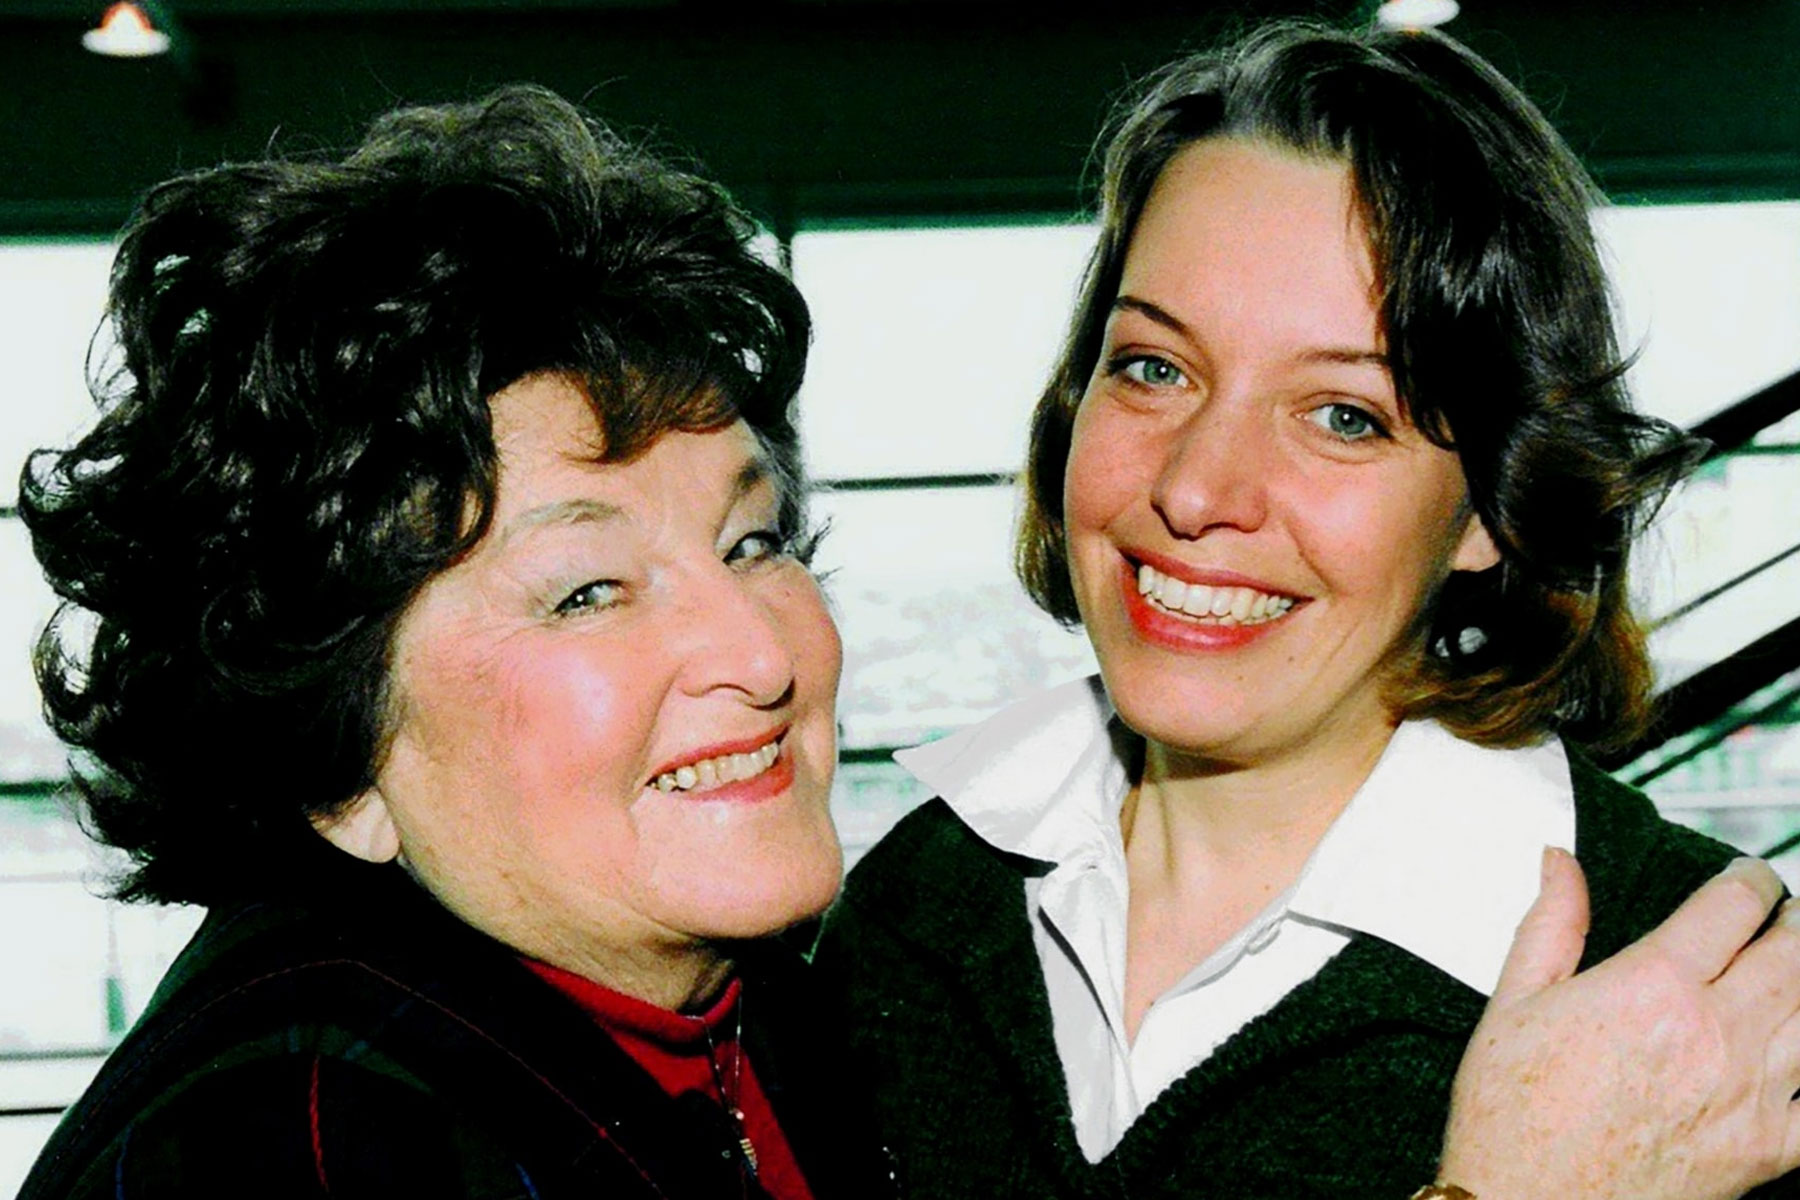 You are currently viewing Birgit Nilsson Foundation Announces 2018 Birgit Nilsson Prize of 1 Million Dollars to NINA STEMME